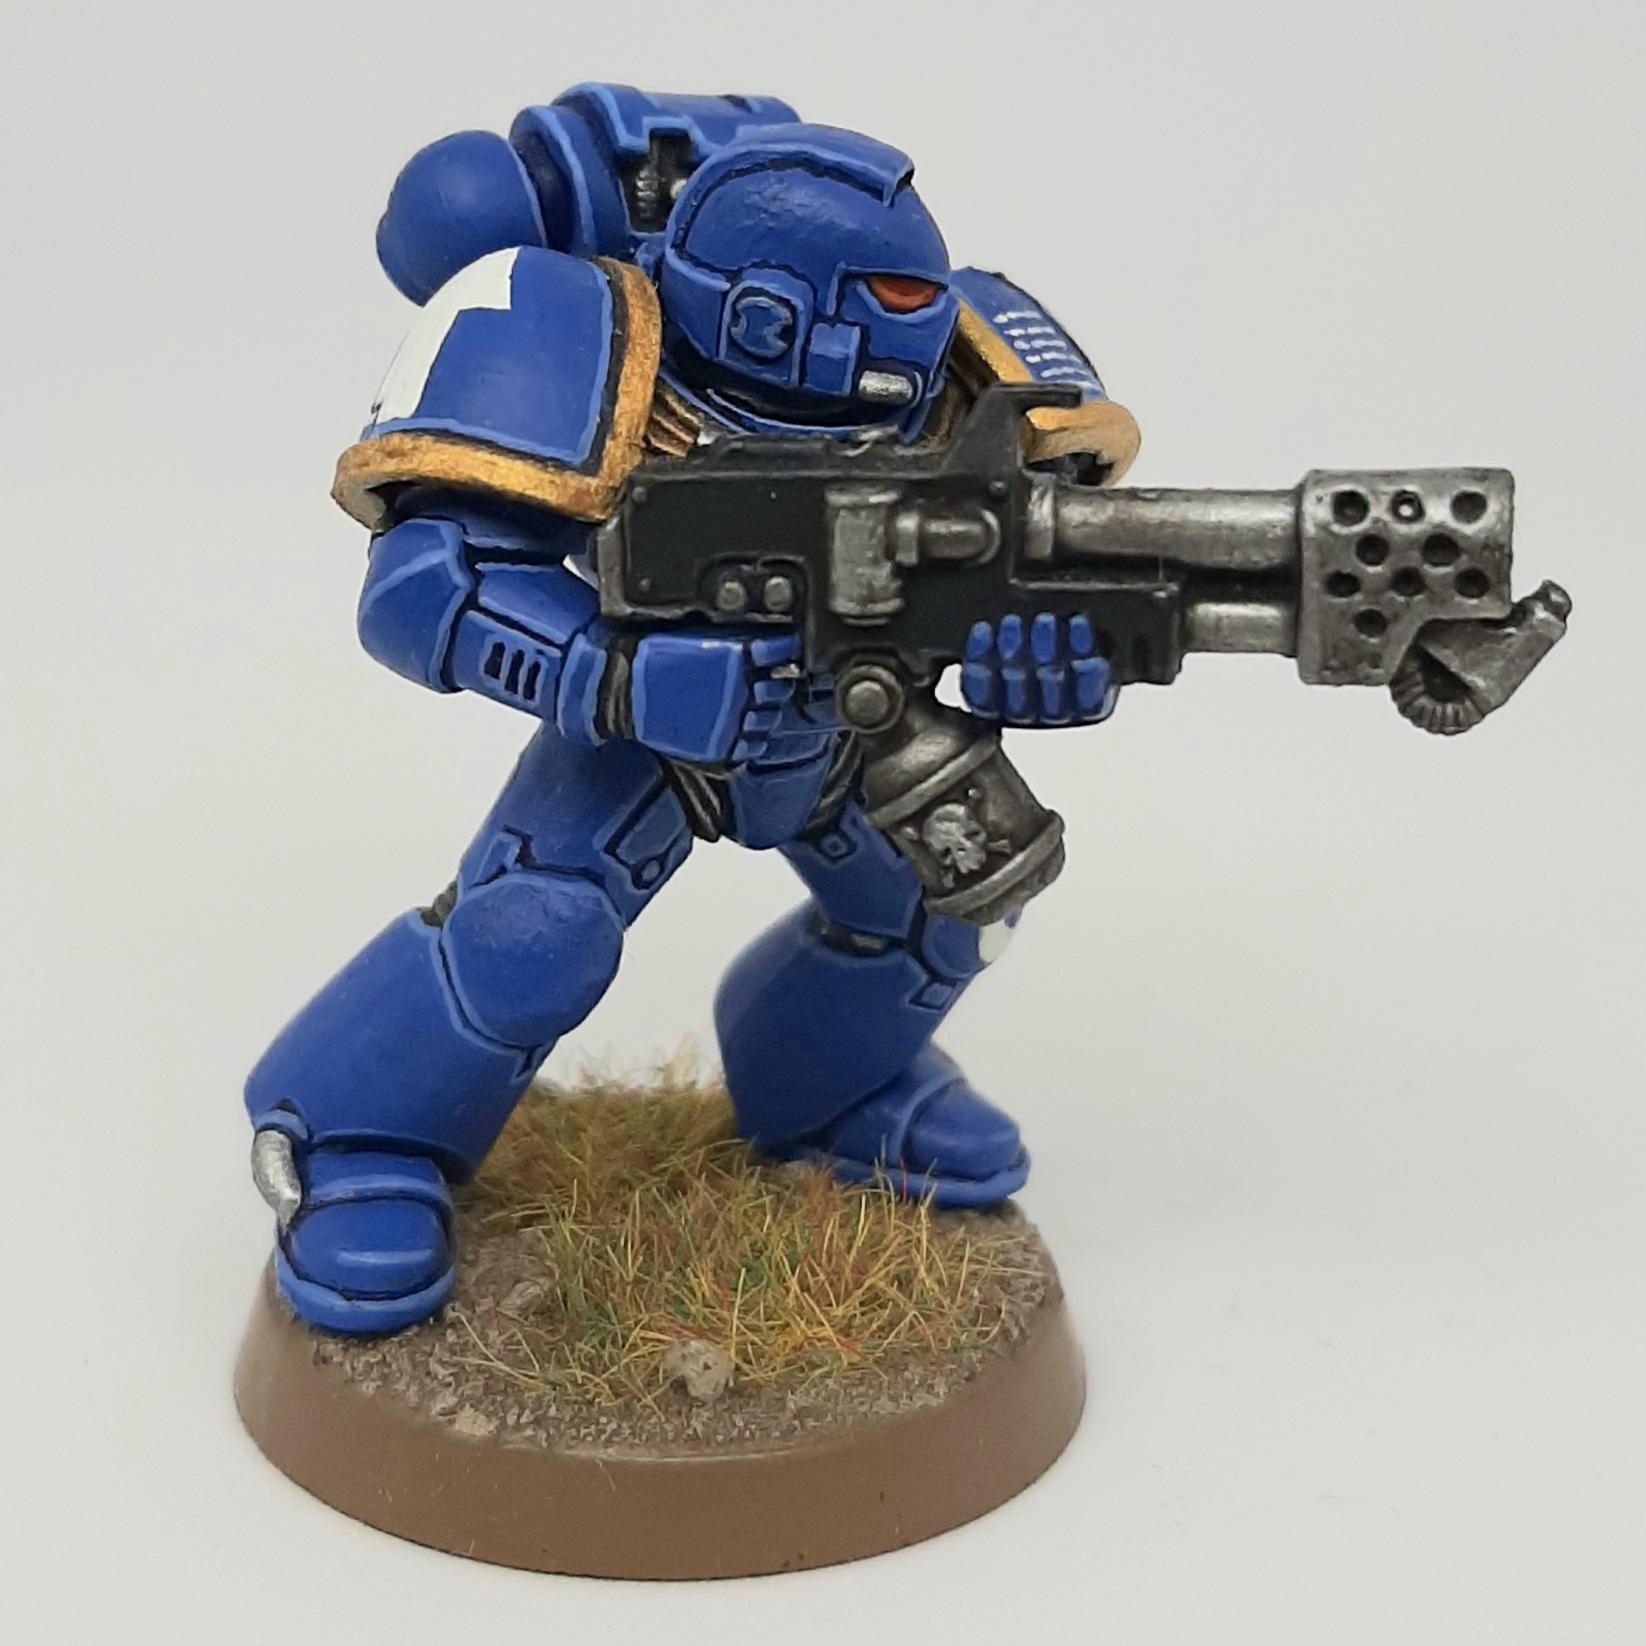 Conversion, Custom, Flamer, Flames, Kitbash, Scratch, Scratch Build, Space, Space Marines, Tactical, Thrower, Ultramarines